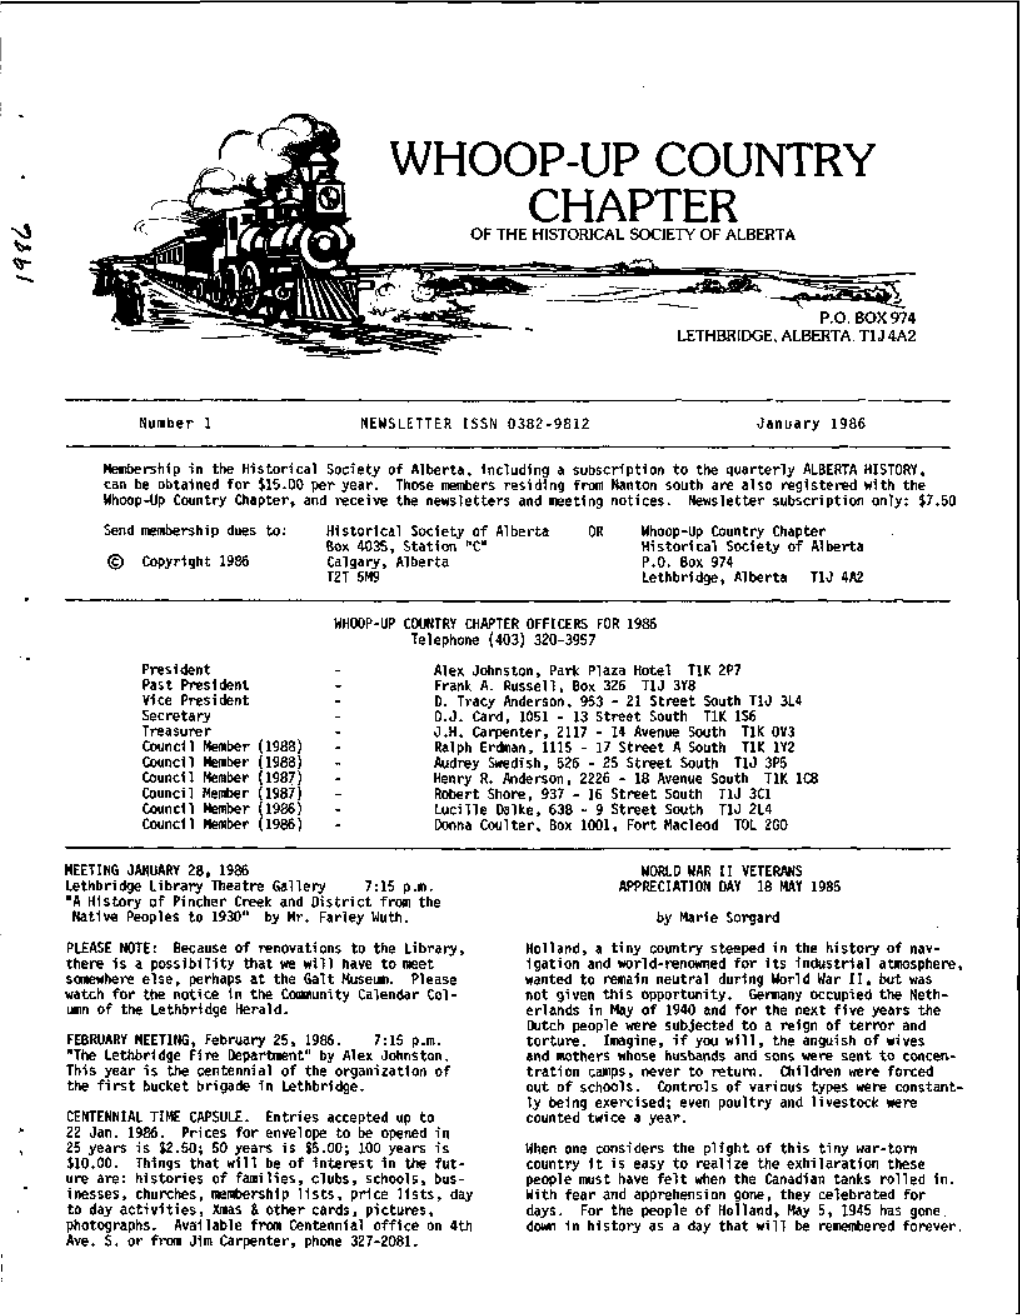 Whoop-Up Country Chapter of the Historical Society of Alberta